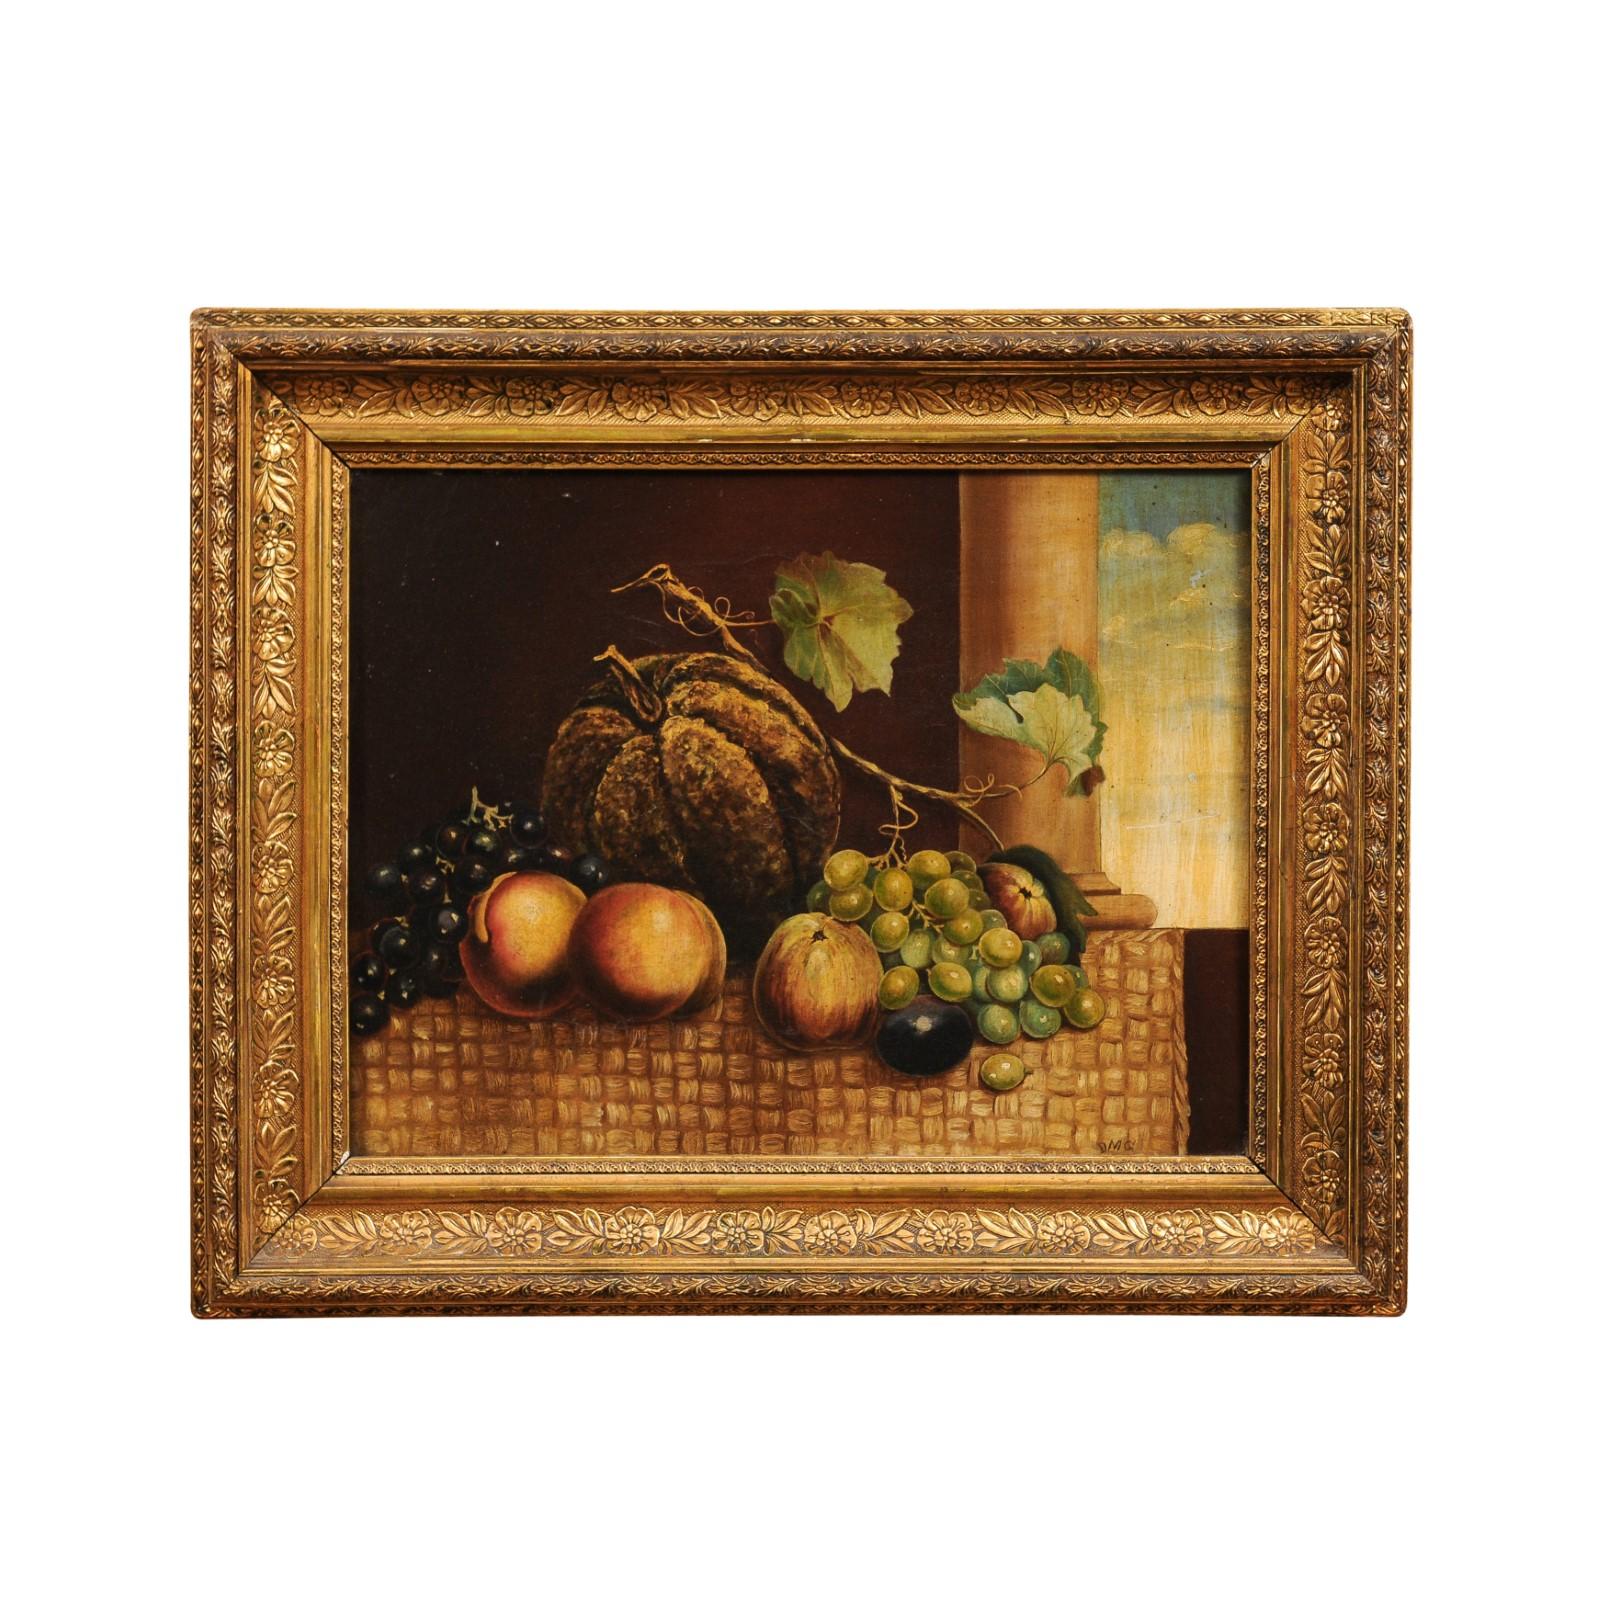 An Italian oil on canvas still life painting from the 19th century depicting fruits in front of a column and an open sky, in giltwood frame. Created in Italy during the 19th century, this oil on canvas still life painting depicts a delicate